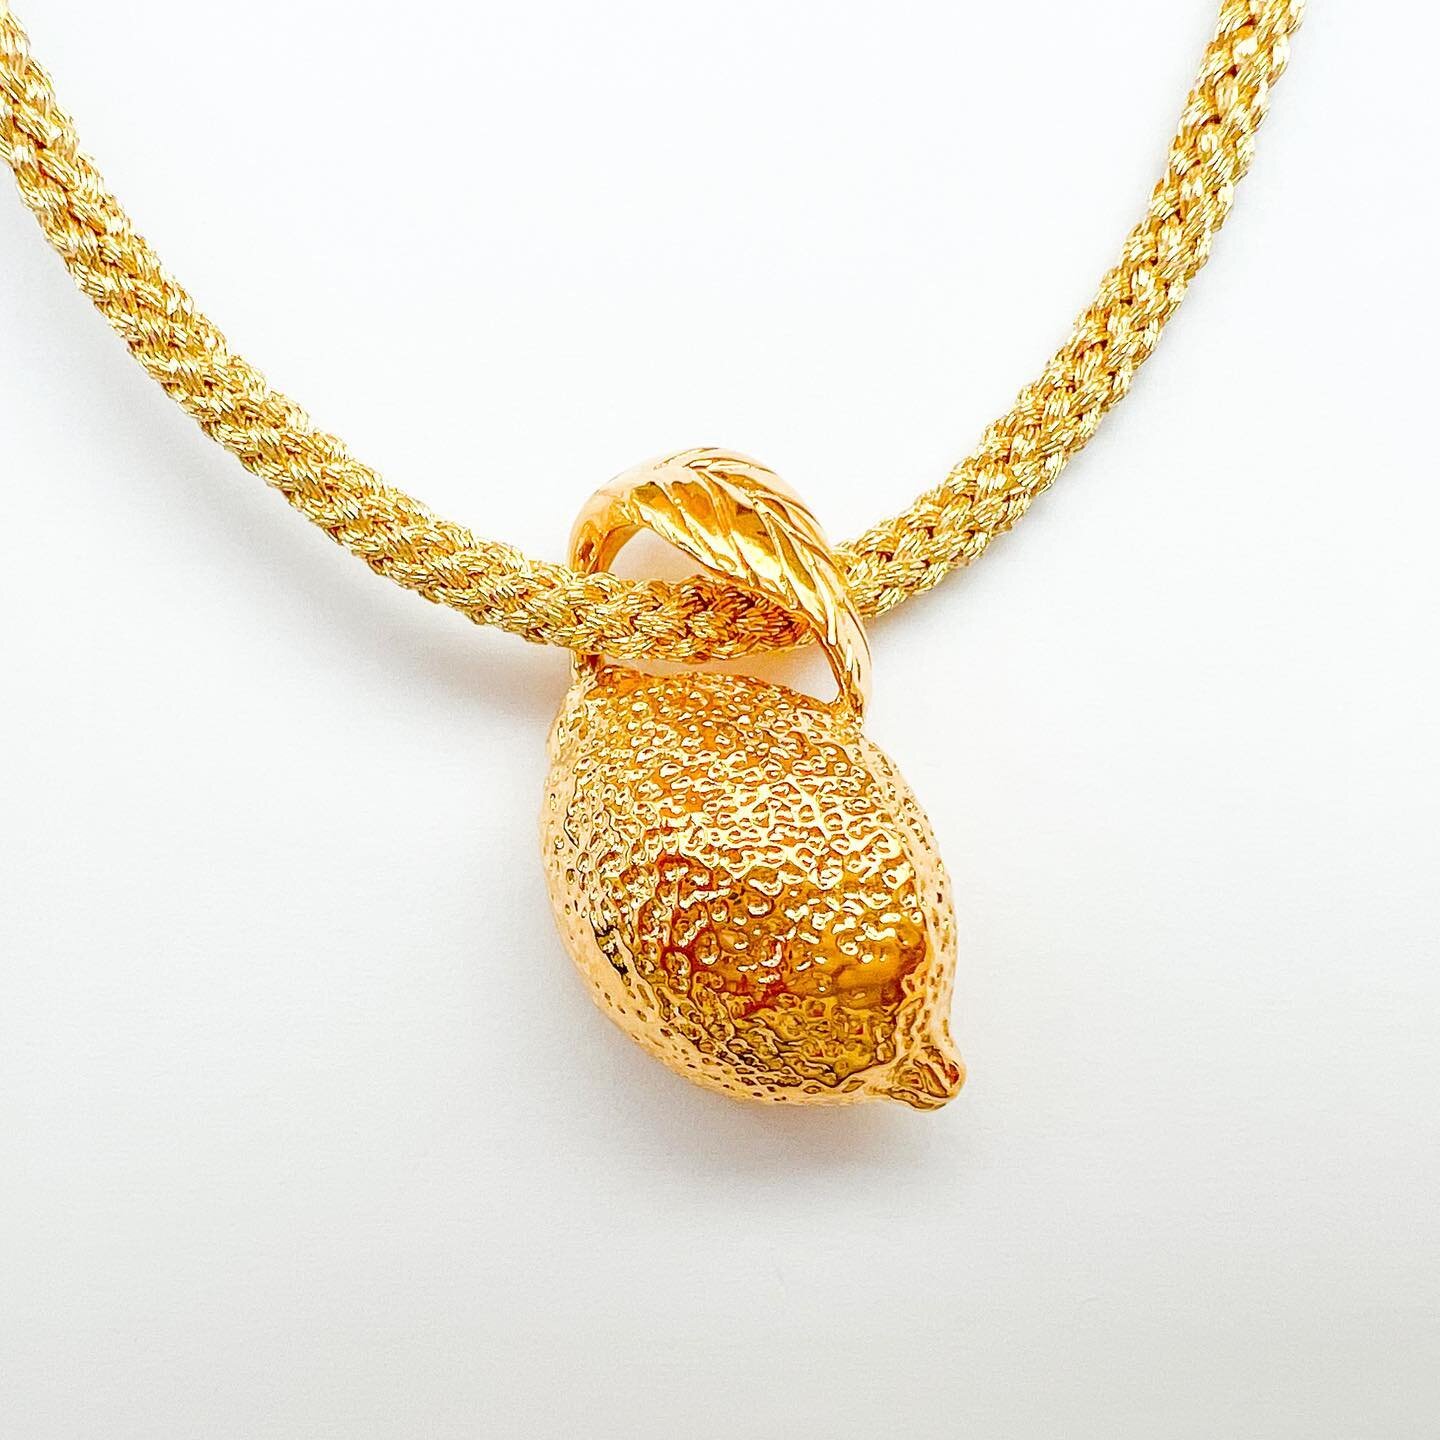 Lemon necklace in gold plated or 9 carat gold with handwoven gold thread. Originally hand-carved in wax (swipe to see wax work), you can see the trace of my hand in every jewel. Order yours now at www.josephinedestael.com #jewellery #lostwaxcasting #